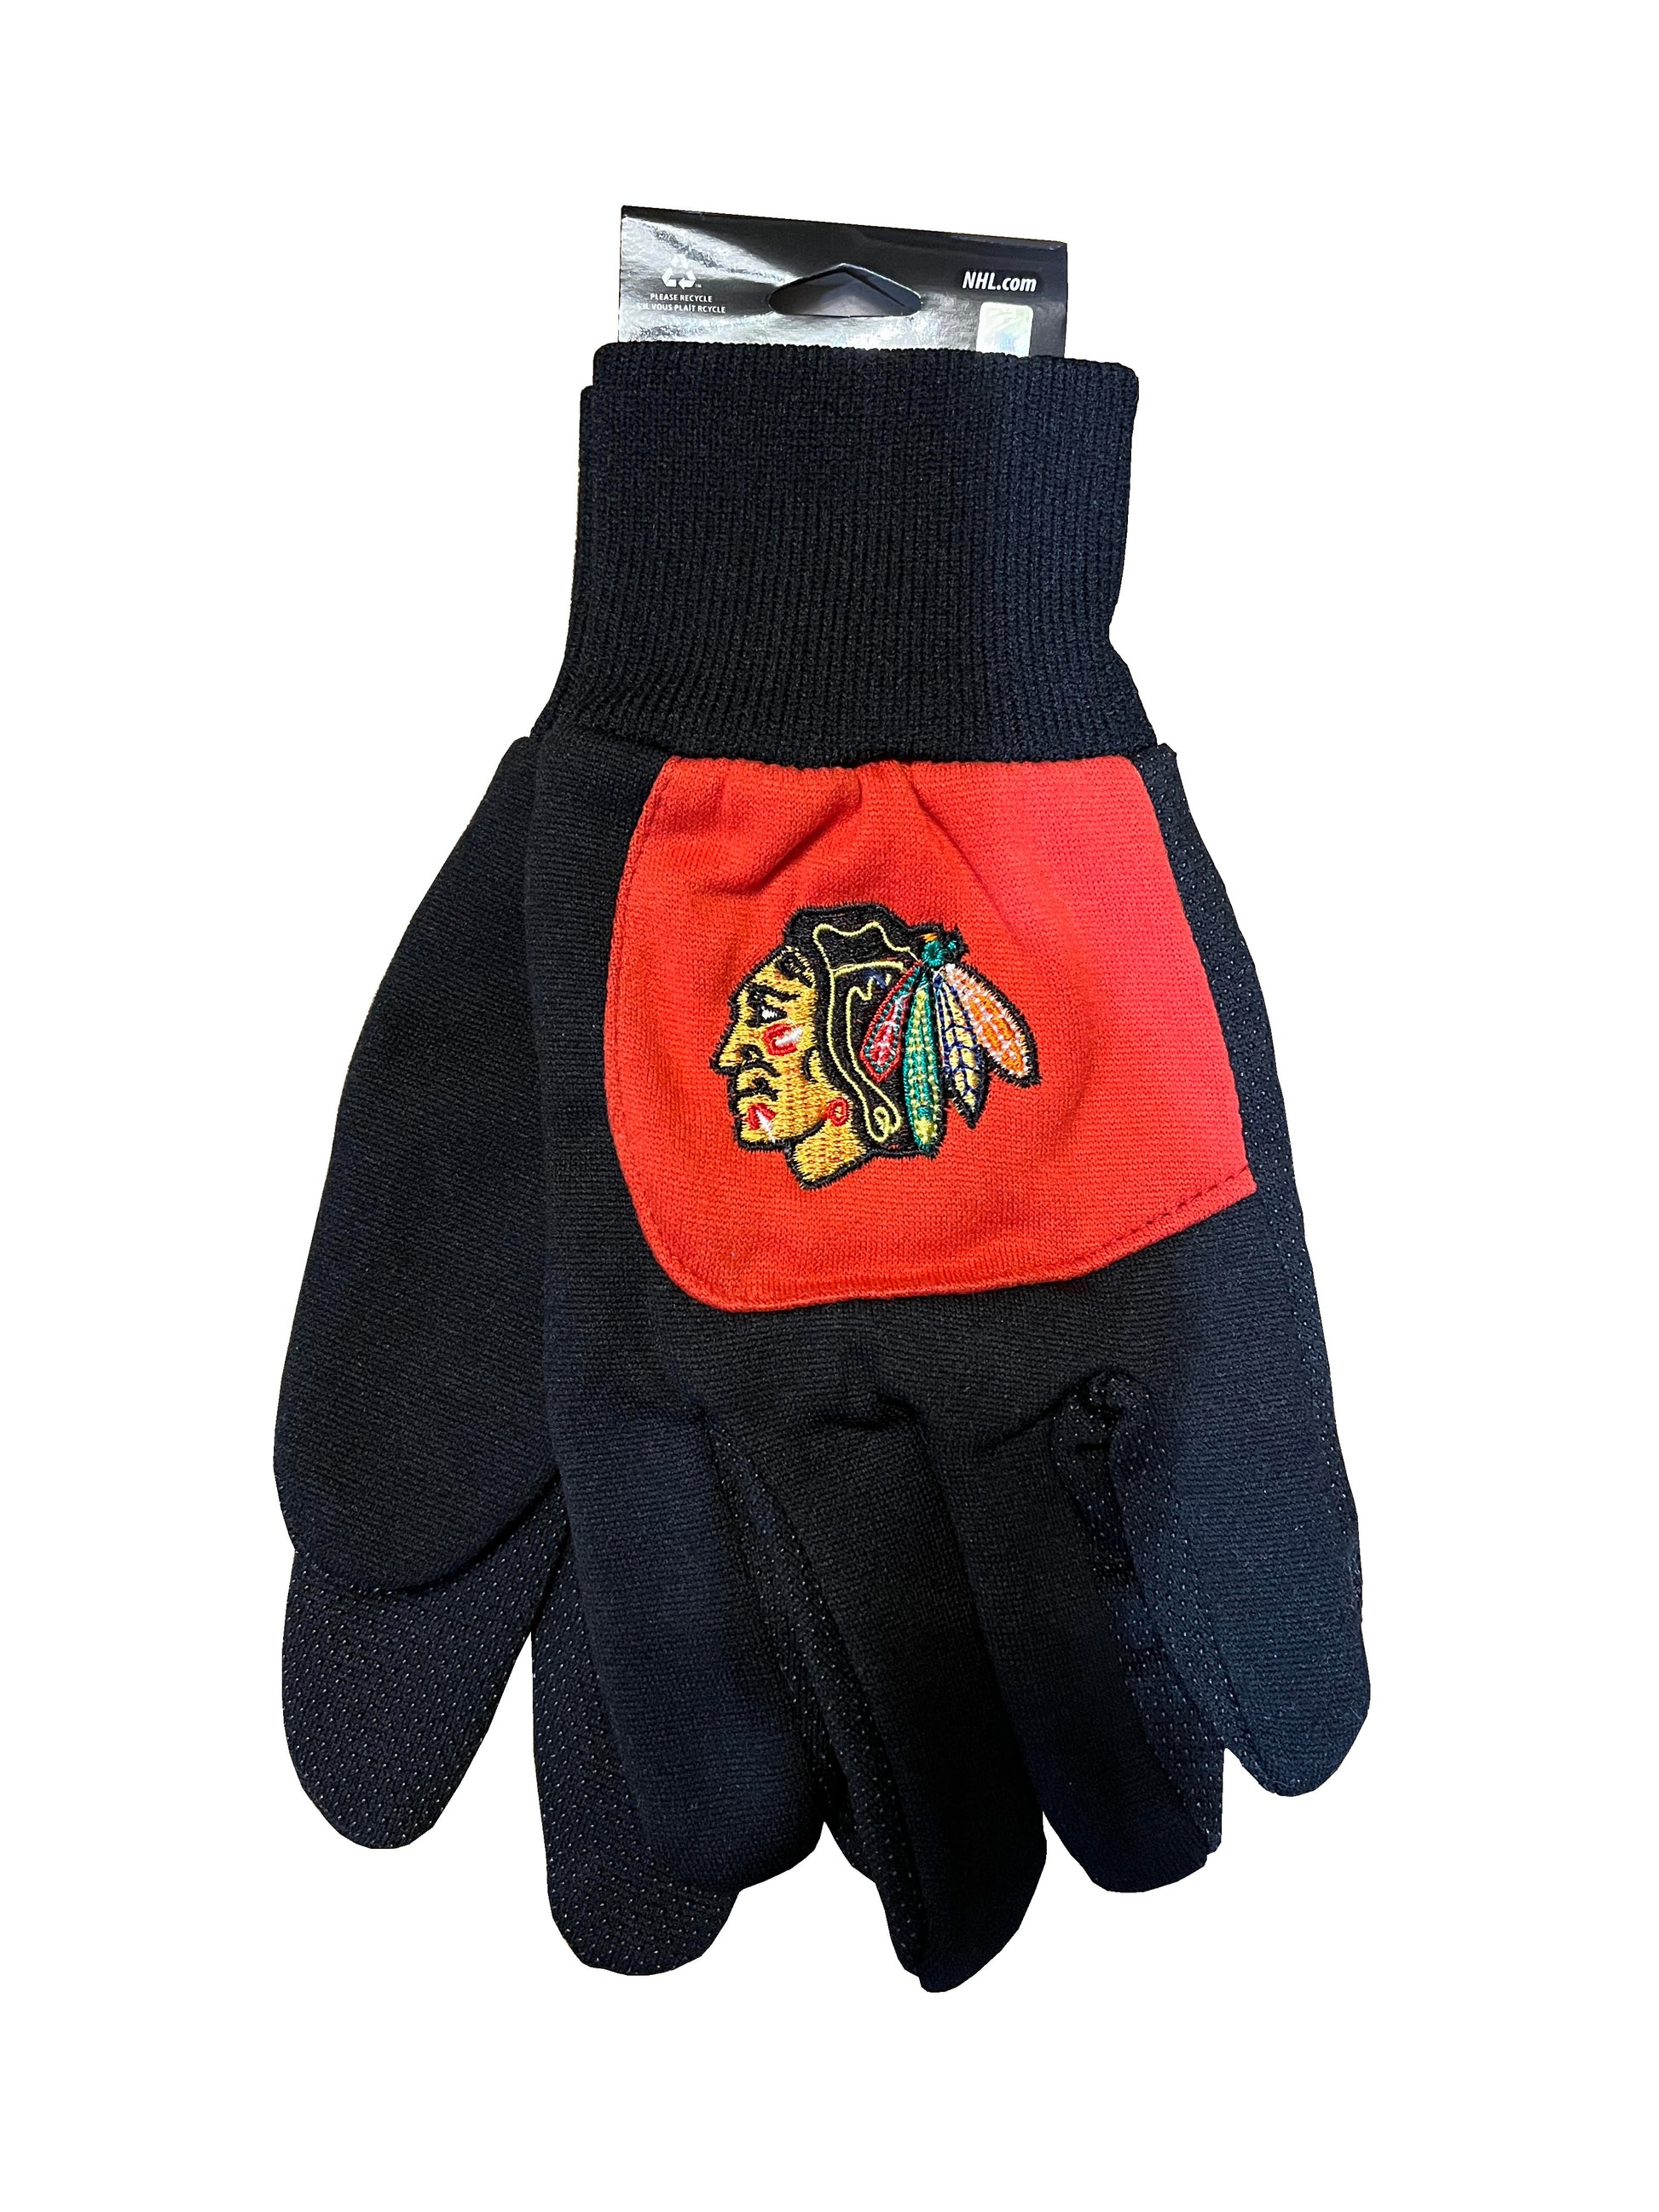 forever-collectibles-nhl-blackhawks-utility-gloves